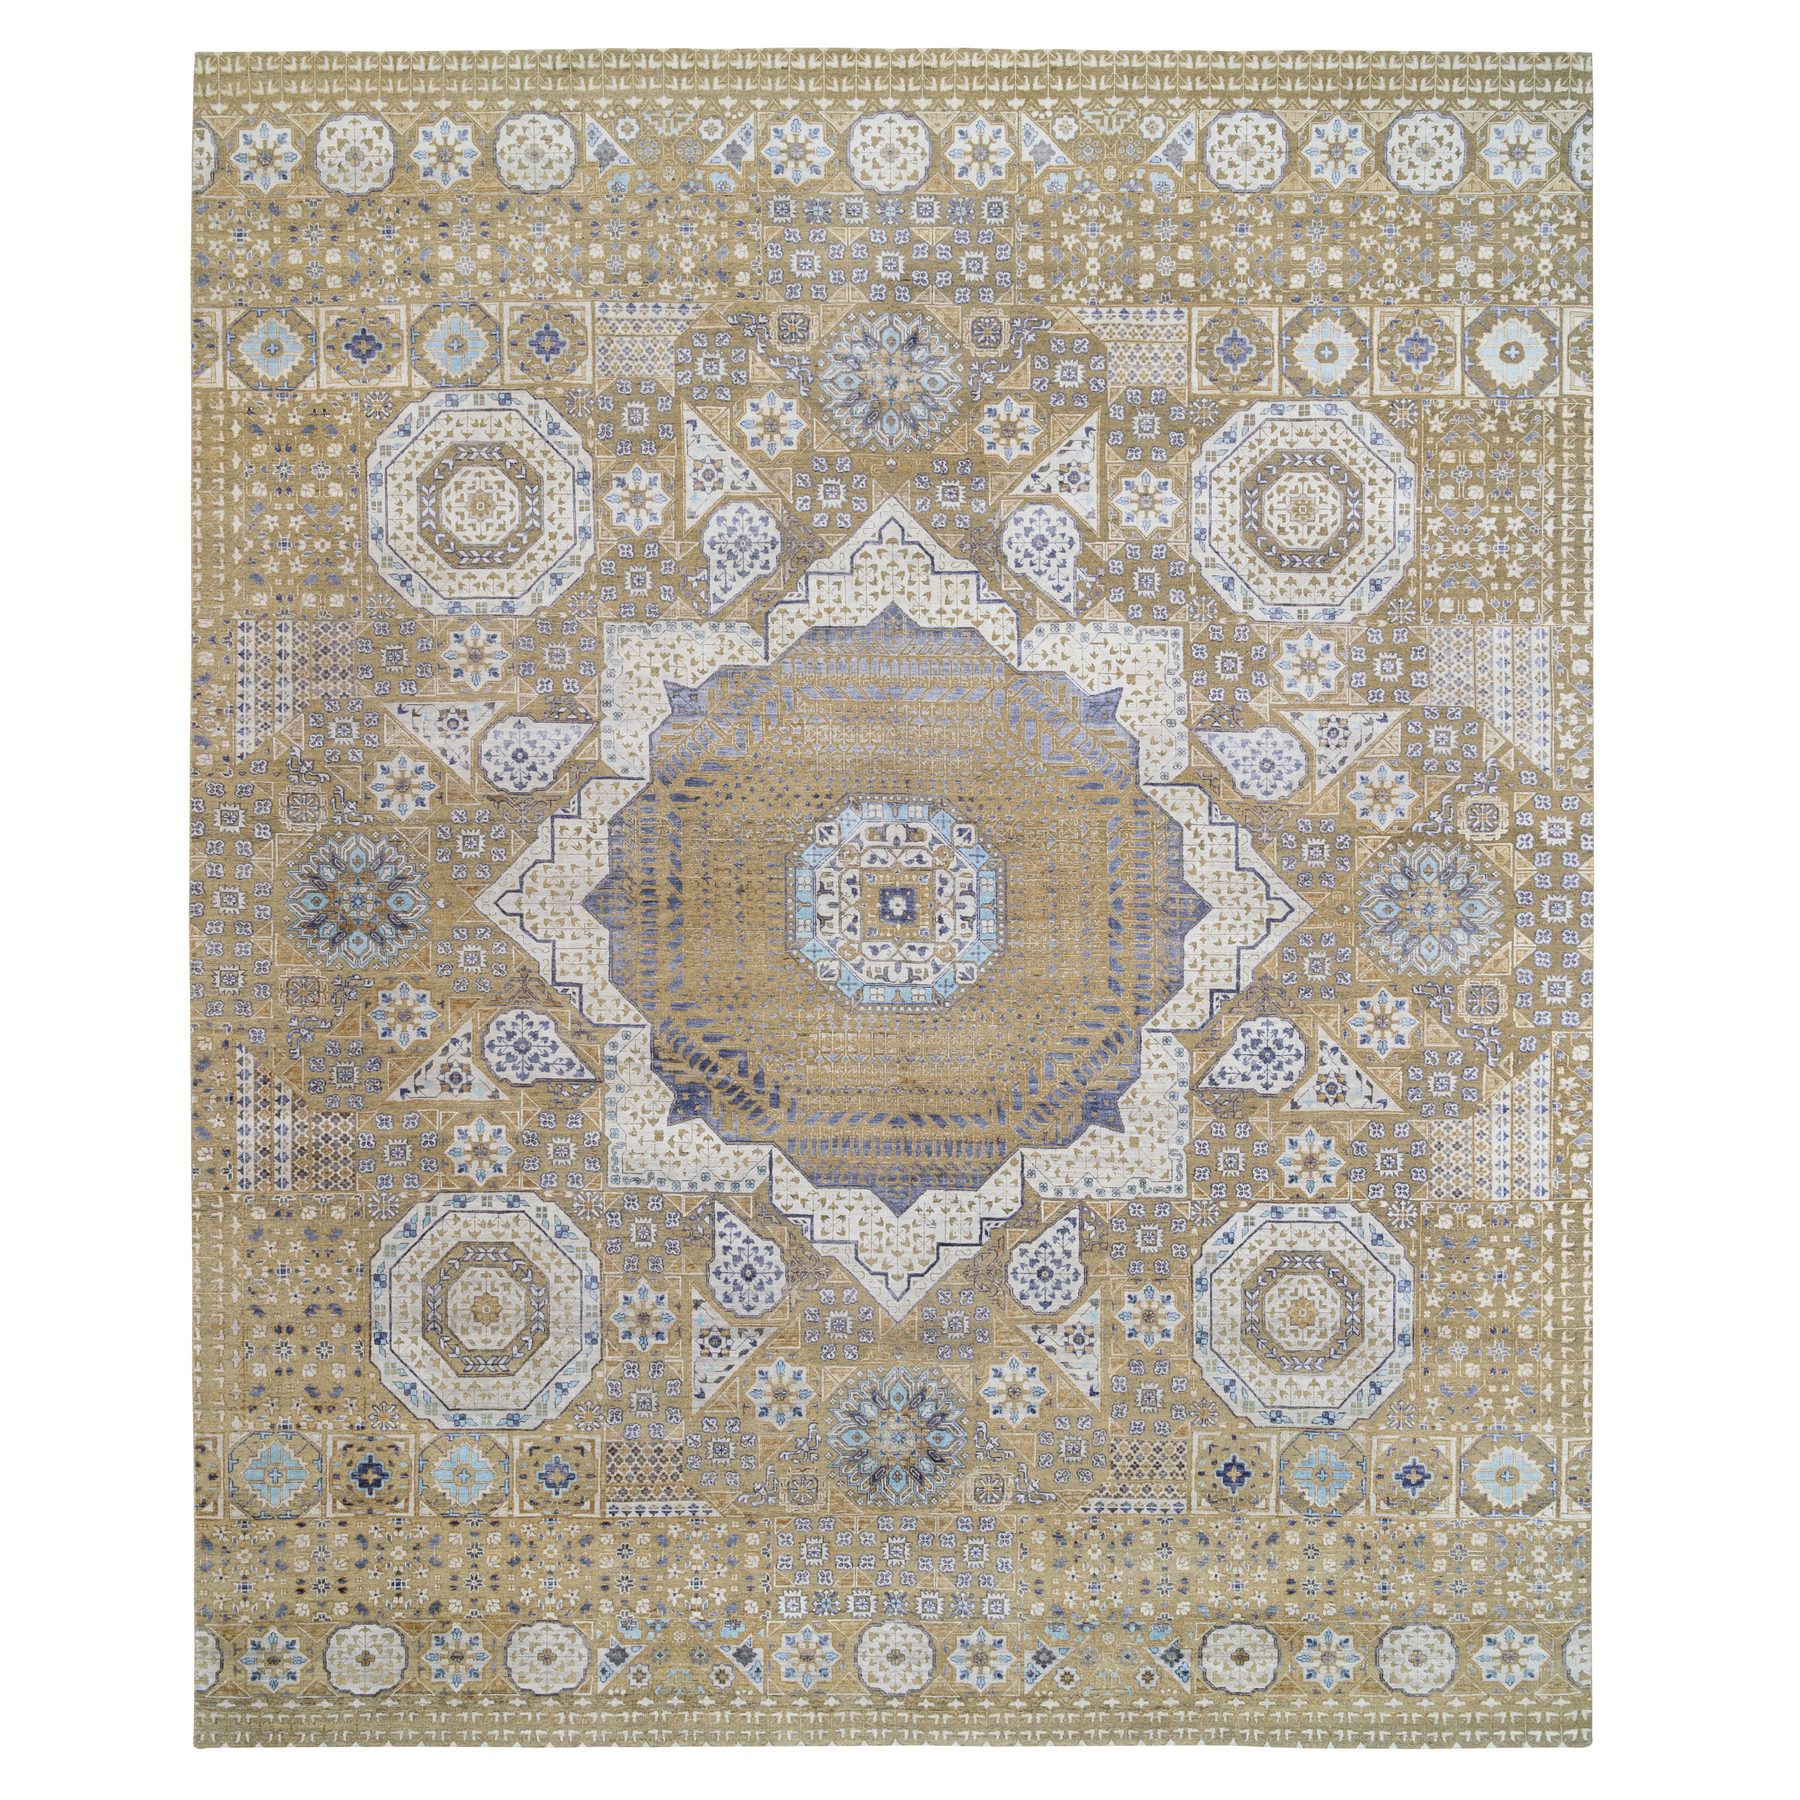 12'3"x15'3" 15th Century Ottoman Mamluk Design Silk with Textured Wool Hi-Low Pile Vintage and Distressed Look Beige Hand Woven Oriental Rug 